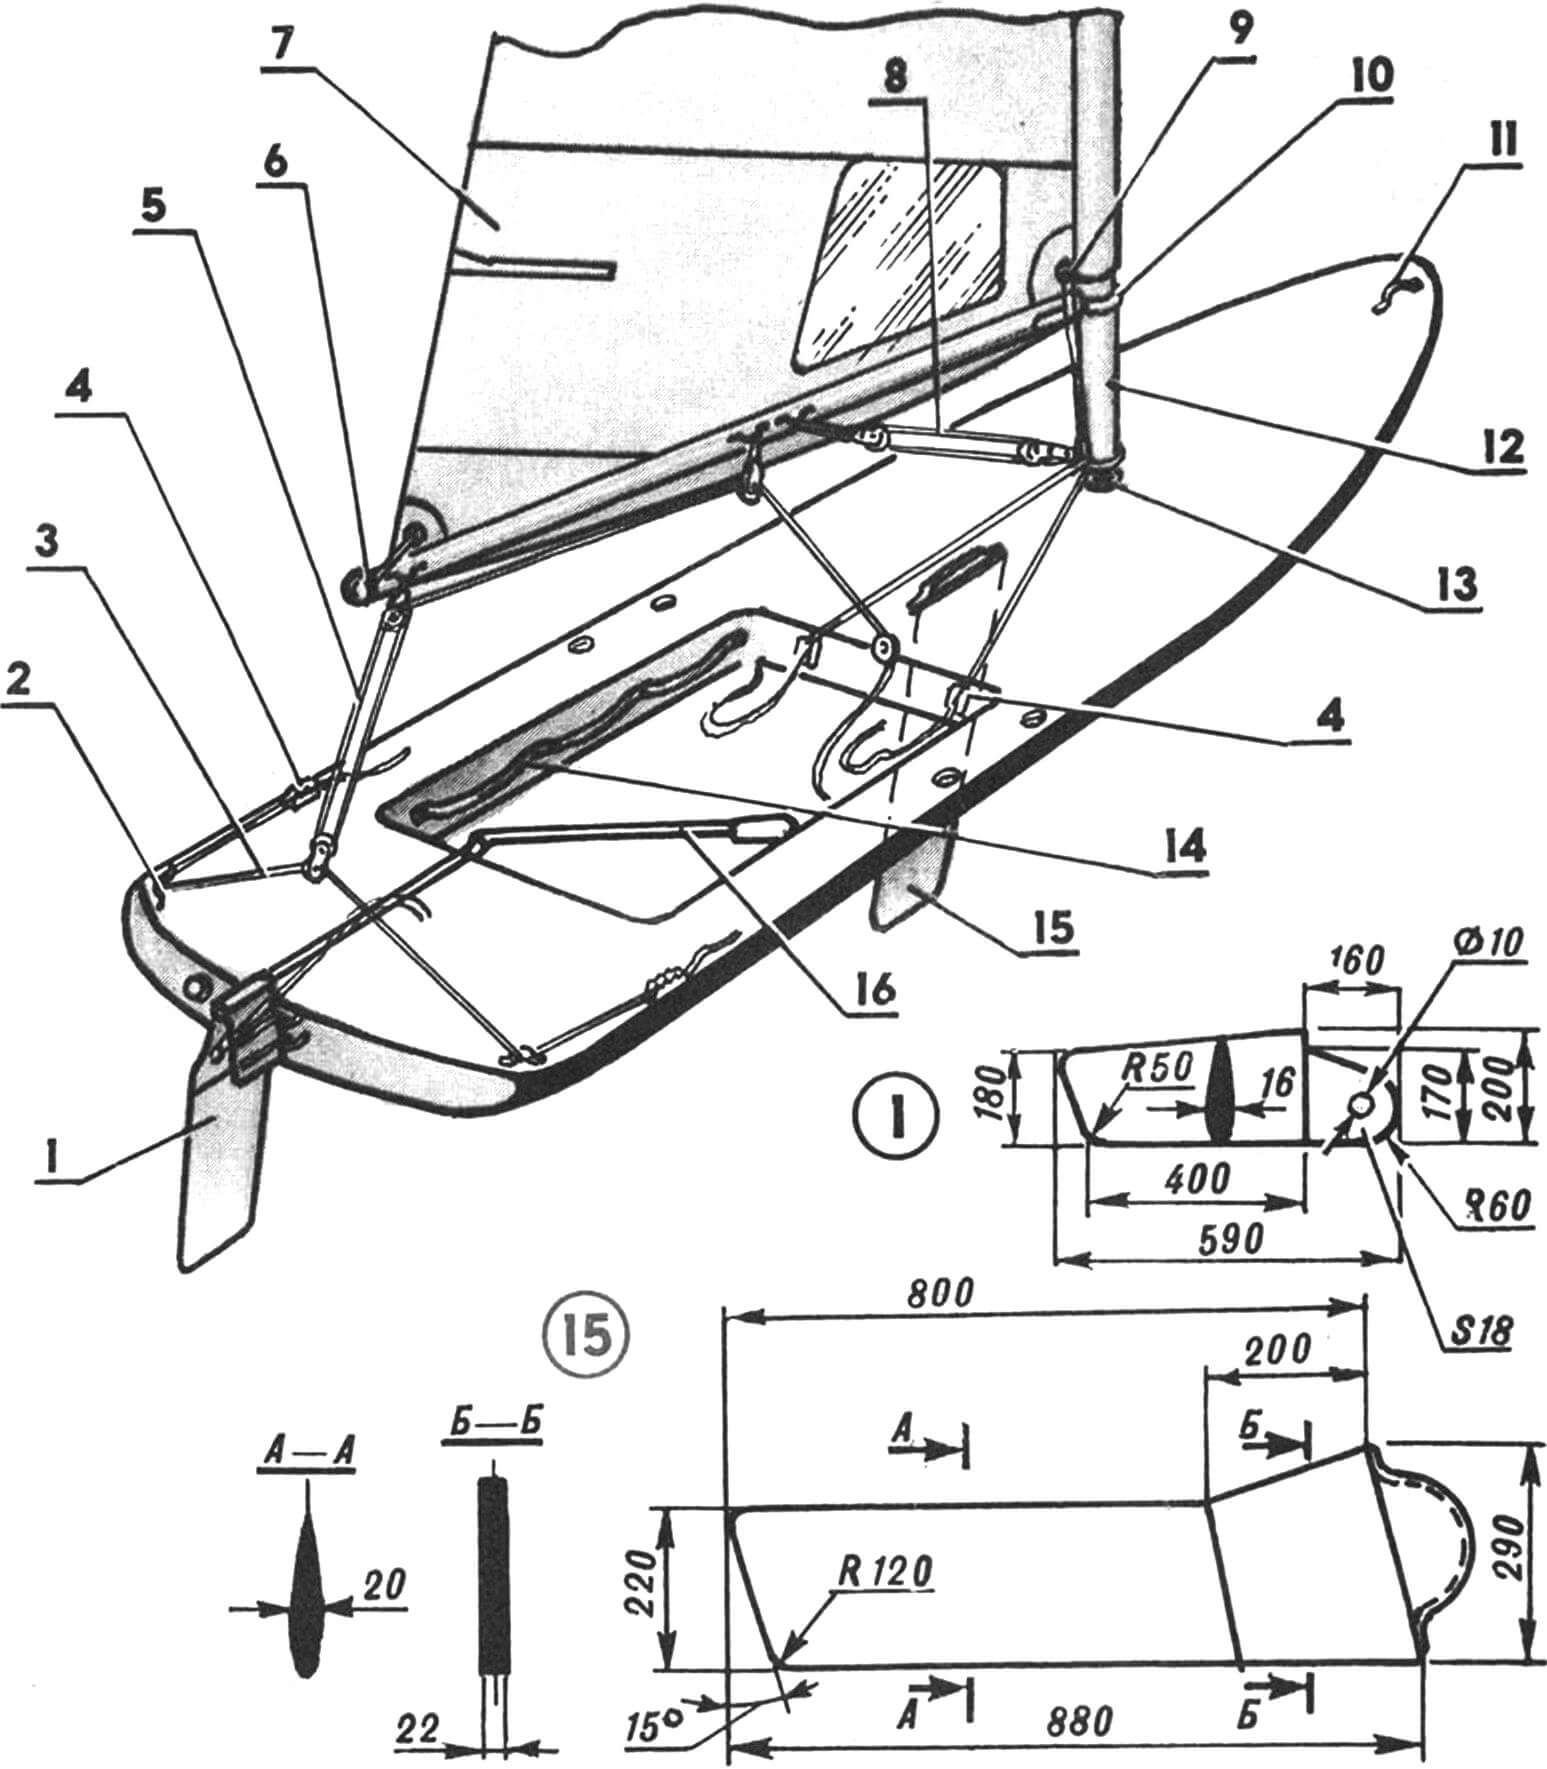 Rice. 5. Rigging of a sailboat in the mini-dinghy version